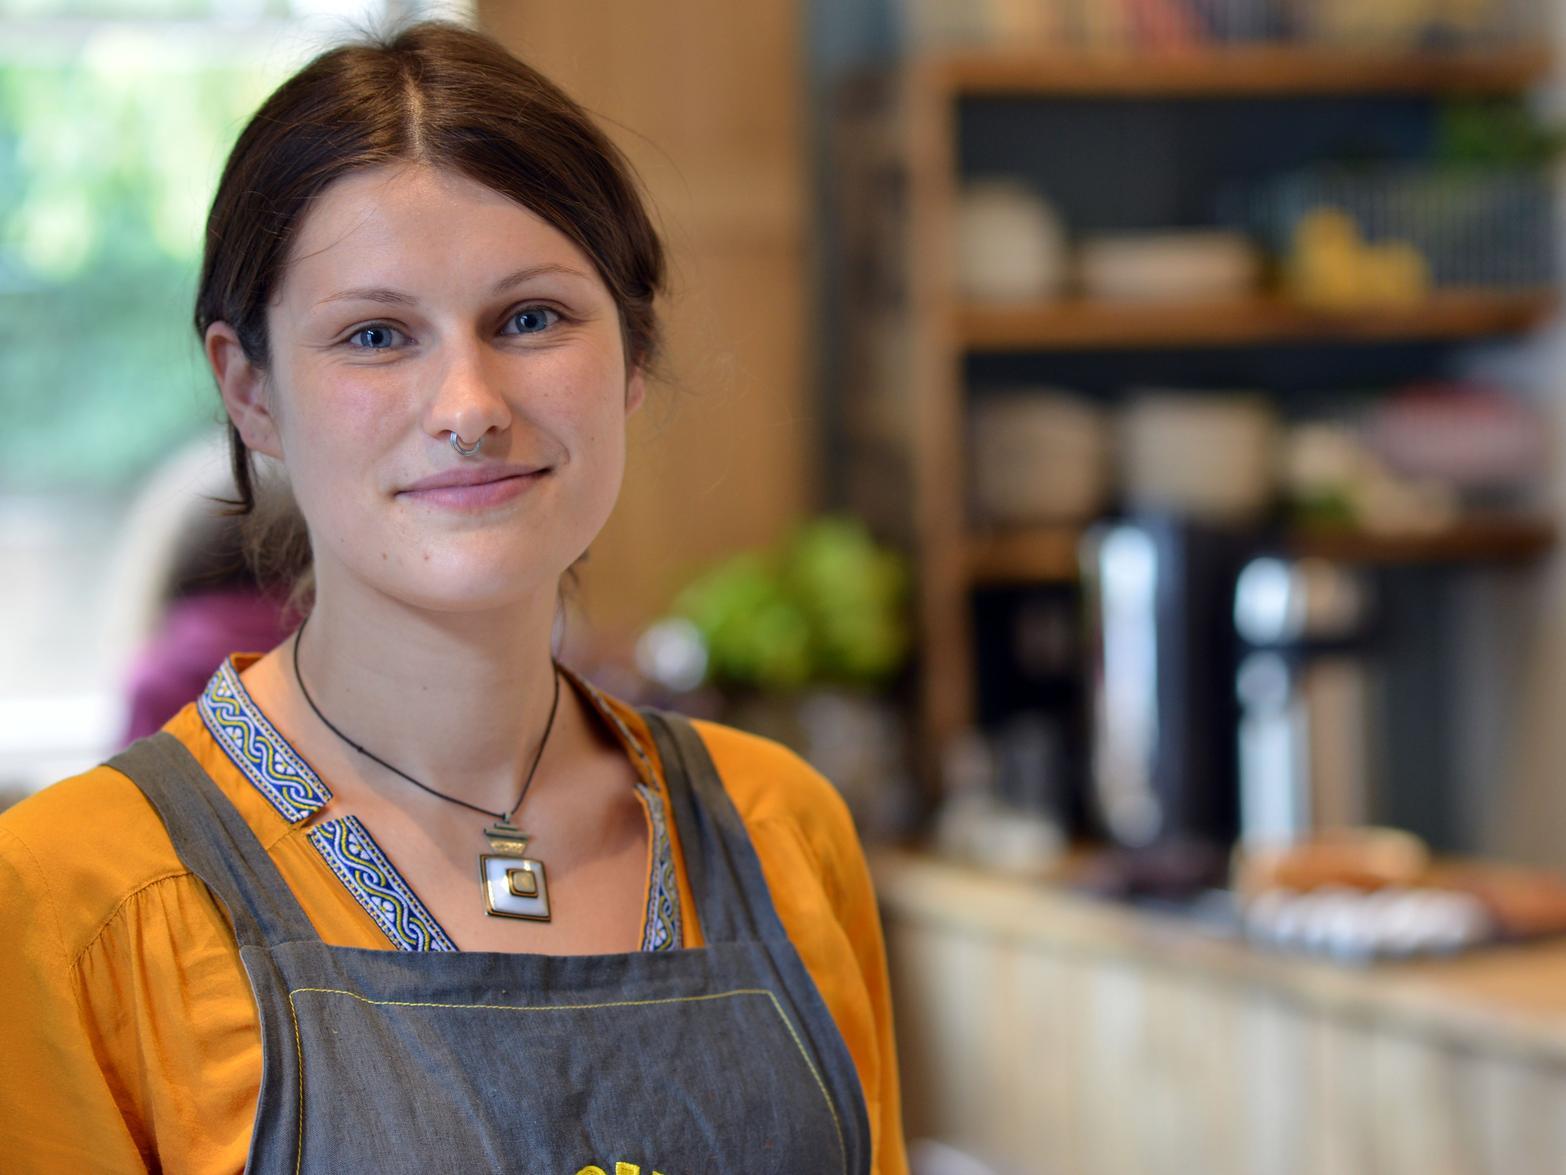 The 26-year-old launched her purpose-before-profit cafe Soul Soup in the Unity Centre, in Lewes, in September 2019.